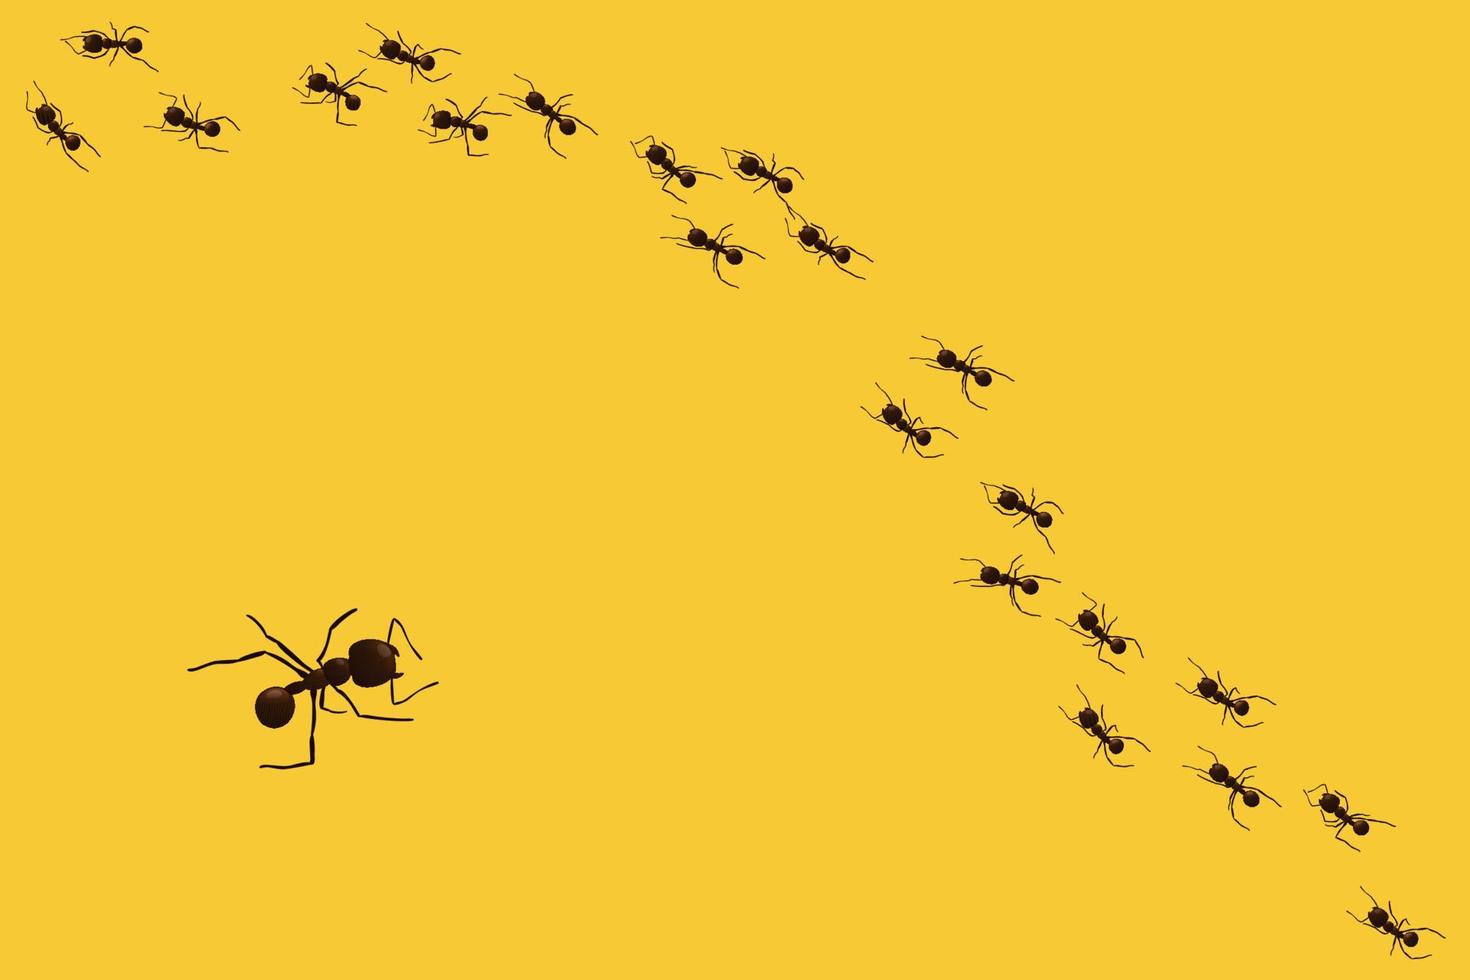 Black ant trail. Working insect curve group silhouettes isolated. Vector illustration.